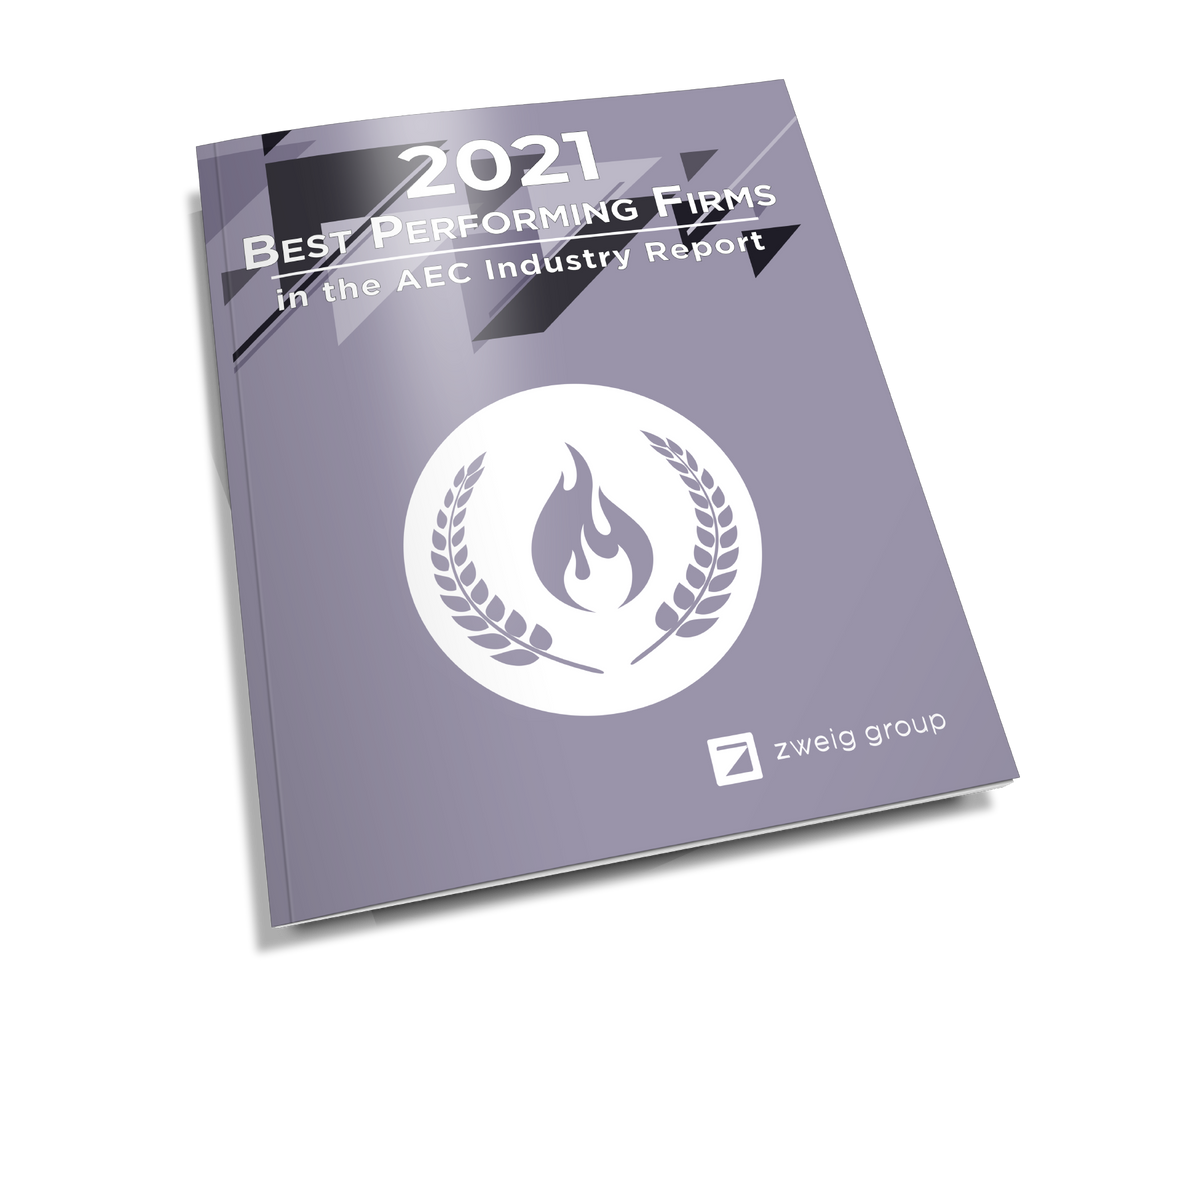 2021 Best Performing Firms in the AEC Industry Report Cover